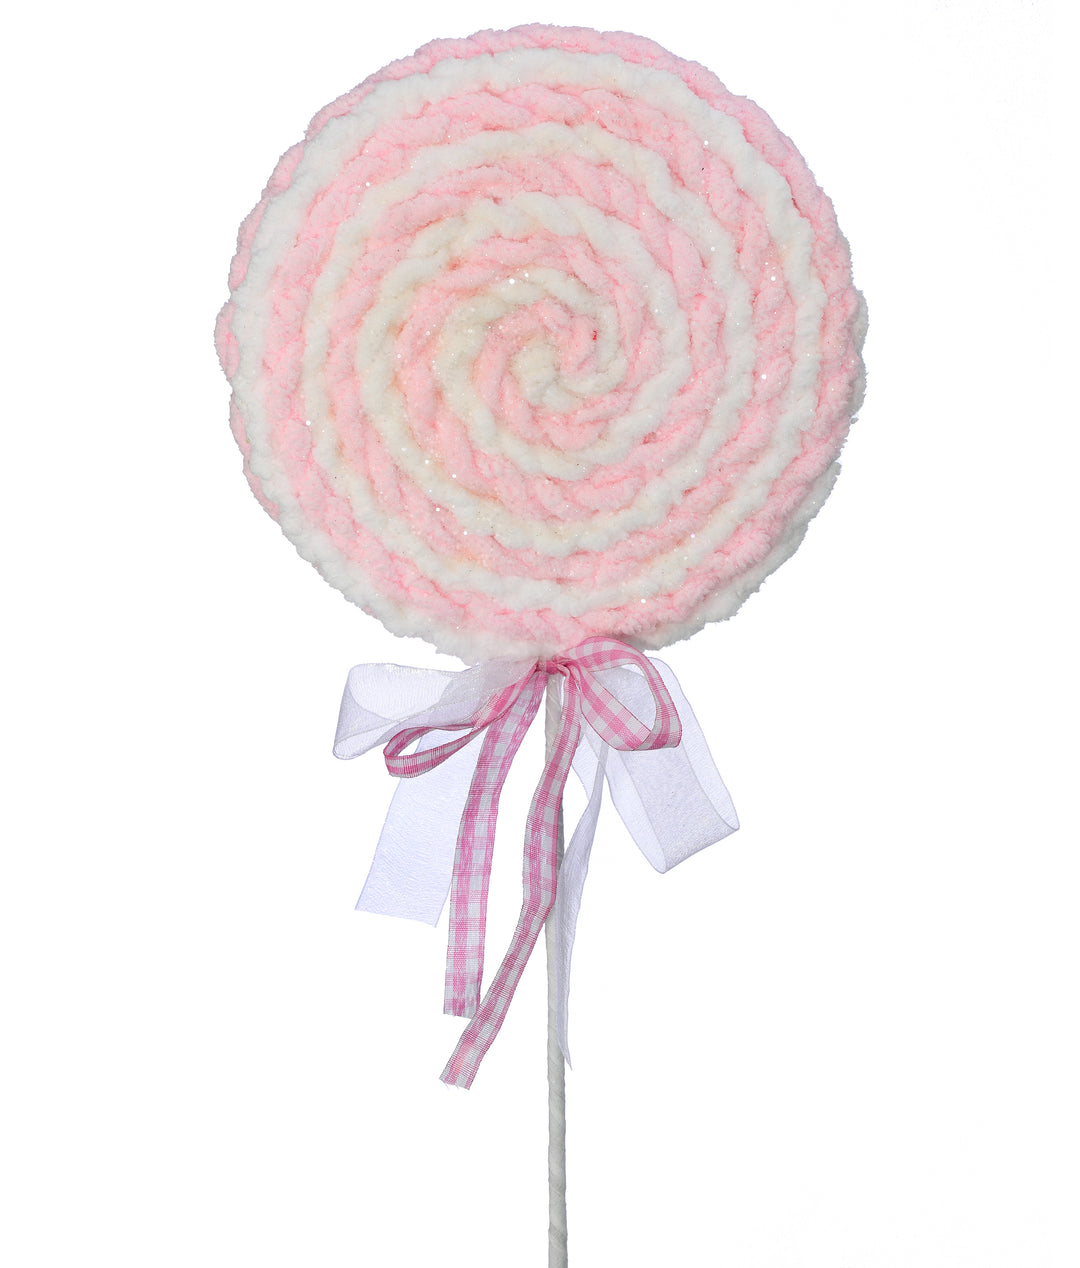 Regency 28" Fabric Frosting Lollipop with Bow Stem in Pink/White